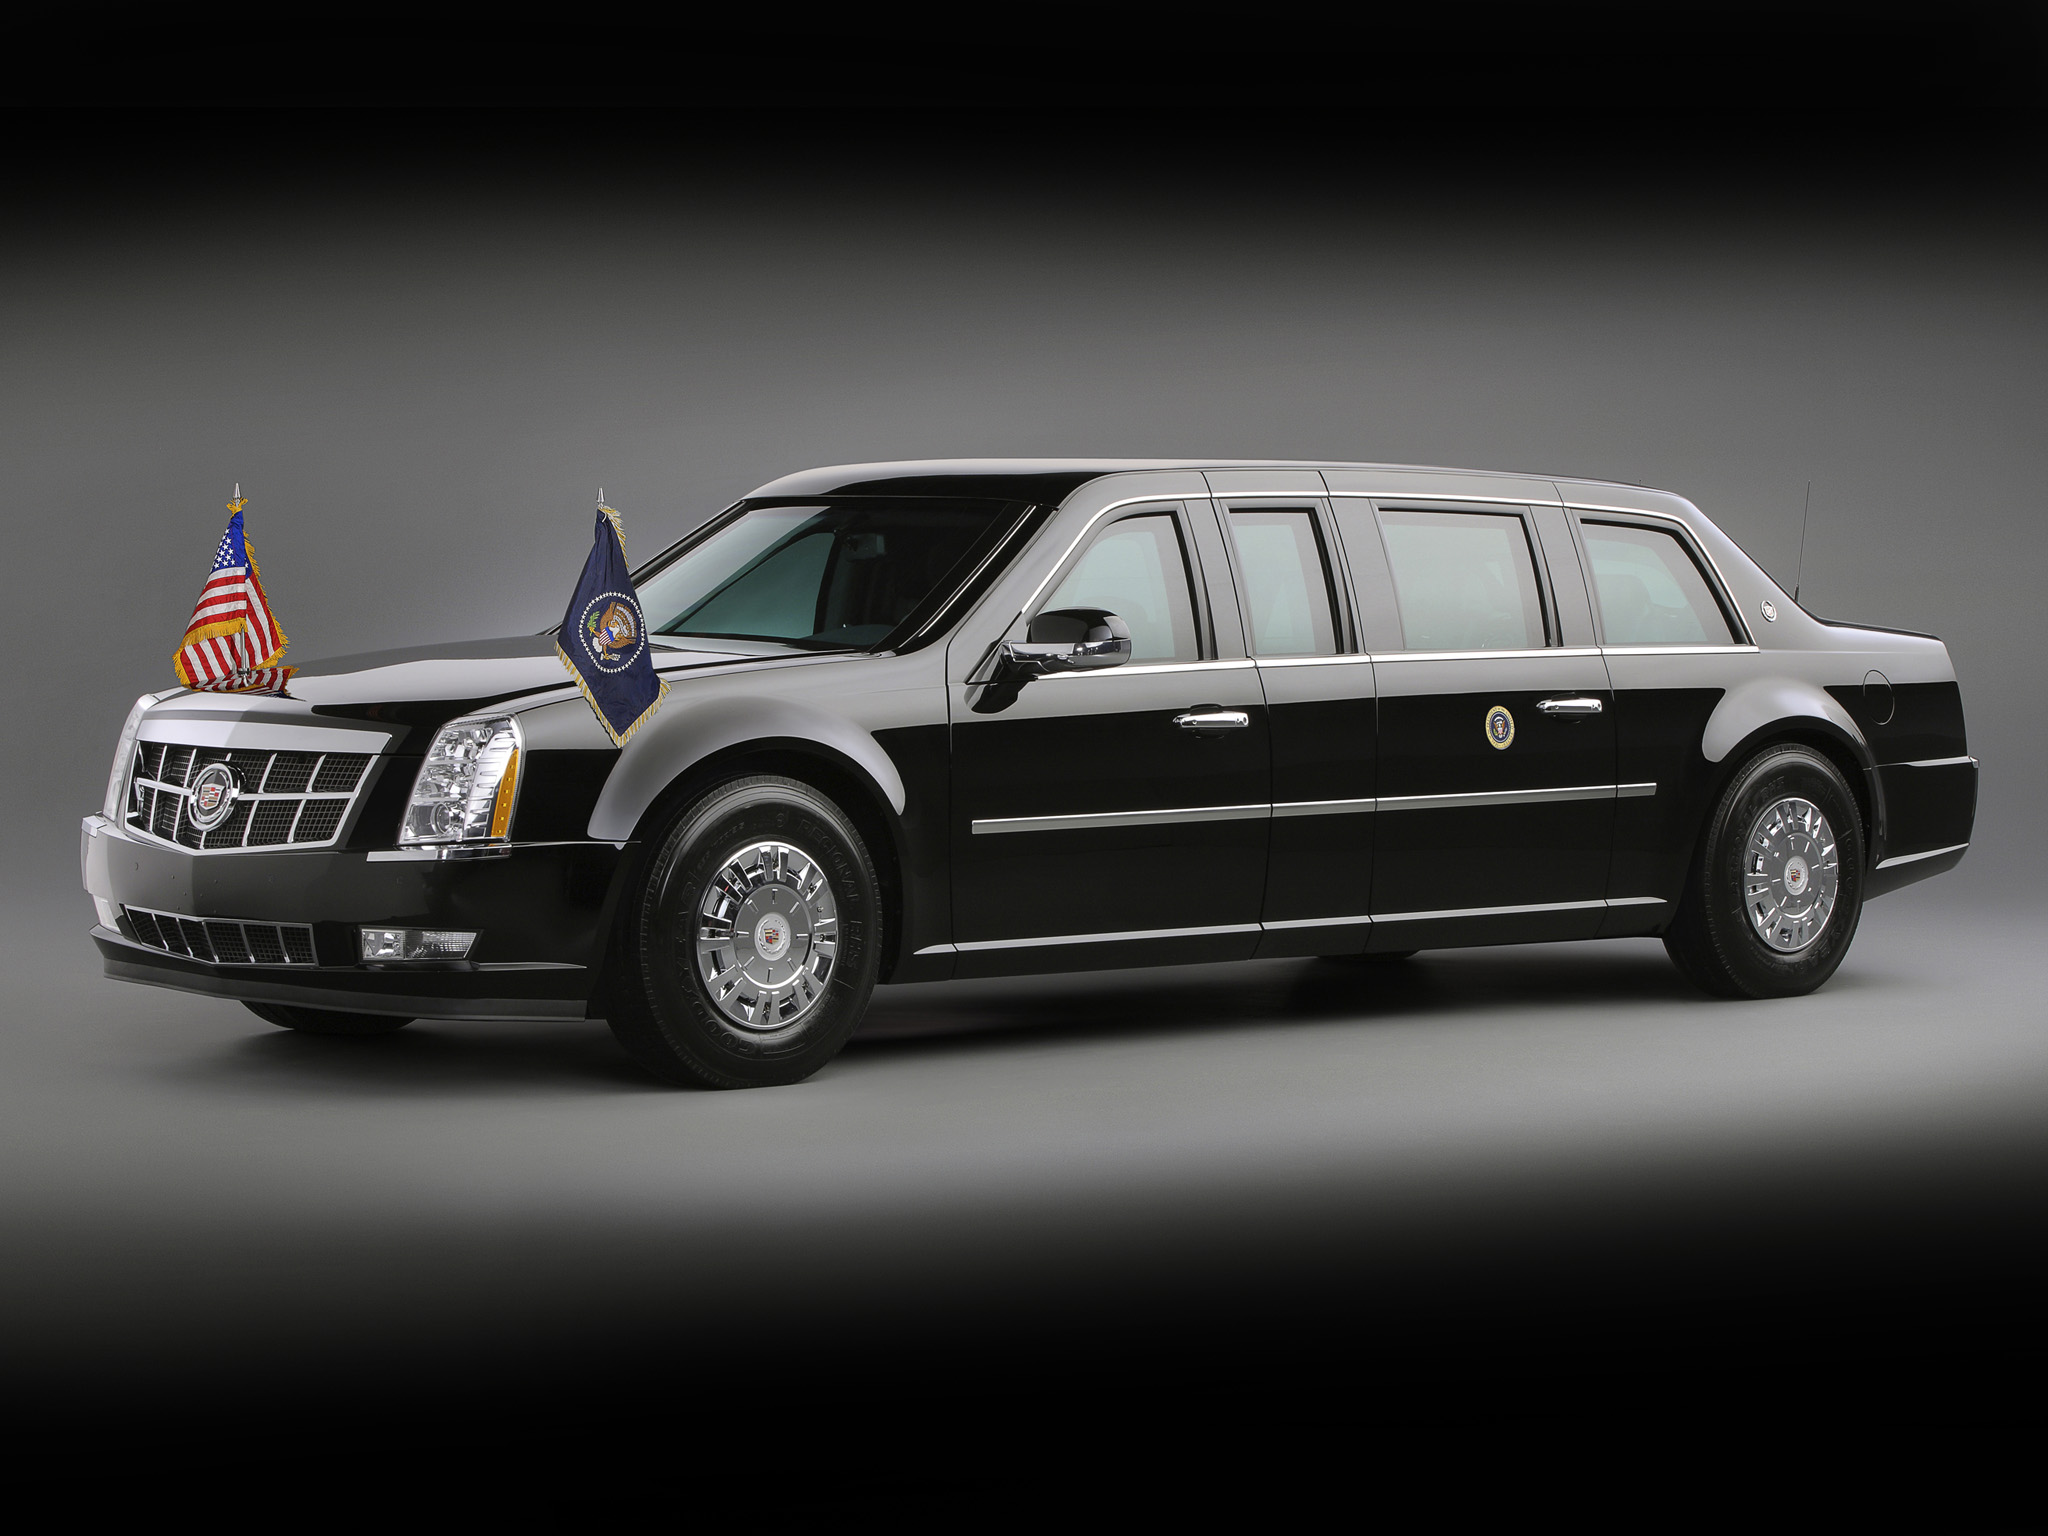 2009, Armored, Cadillac, Presidential, State, Luxury, Gd Wallpaper